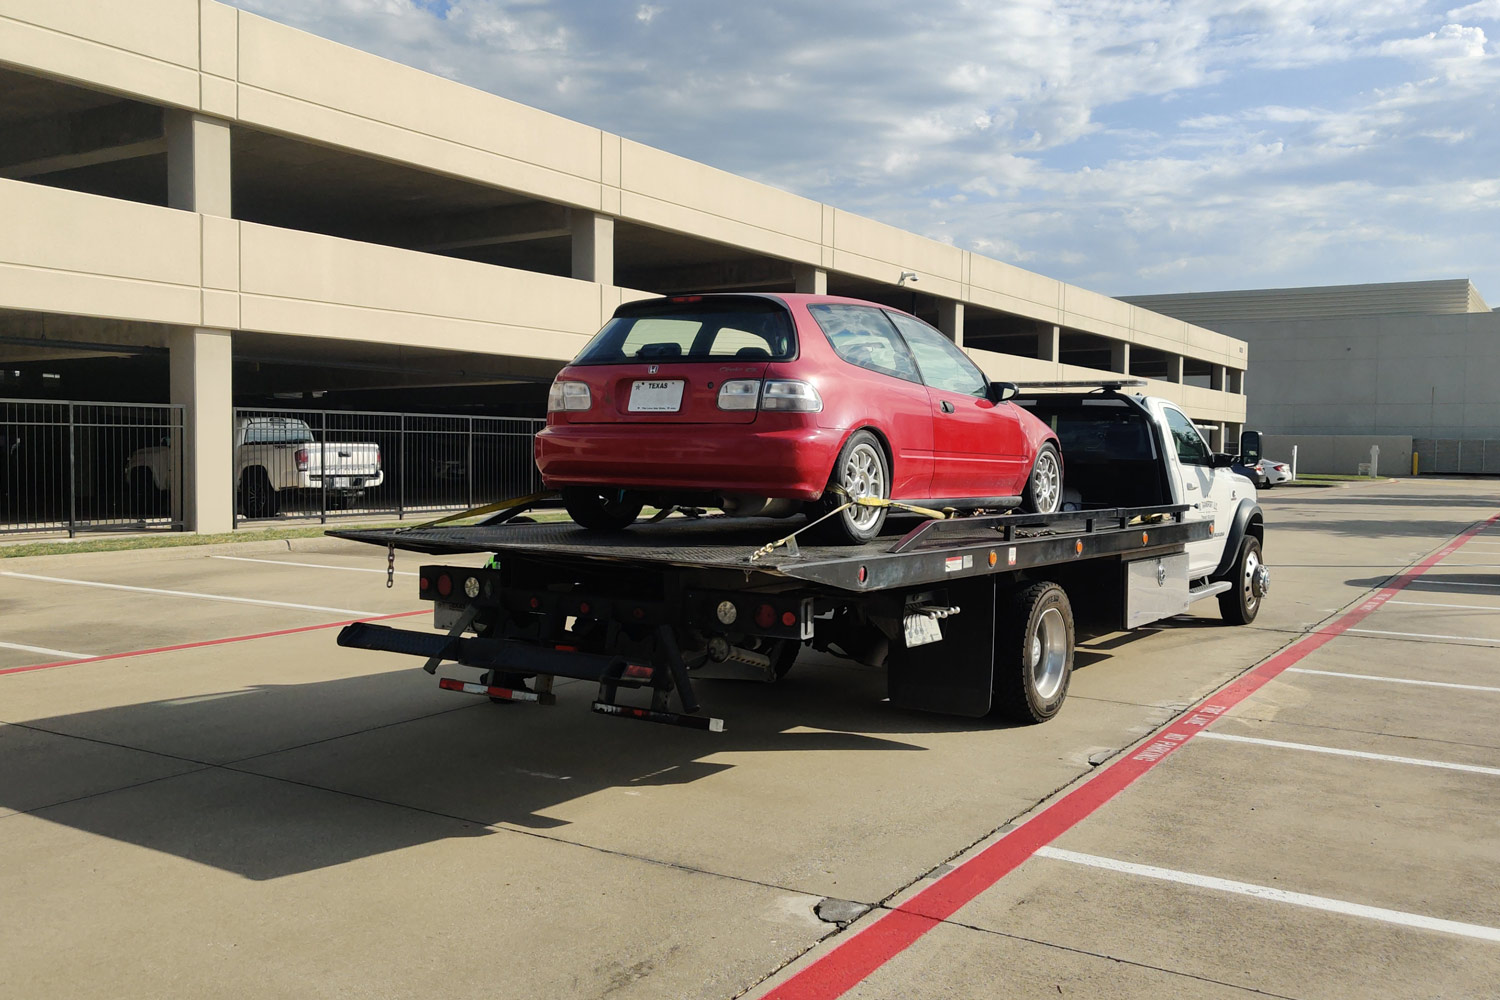 A red Honda Civic is secured on the back of a flatbed tow truck